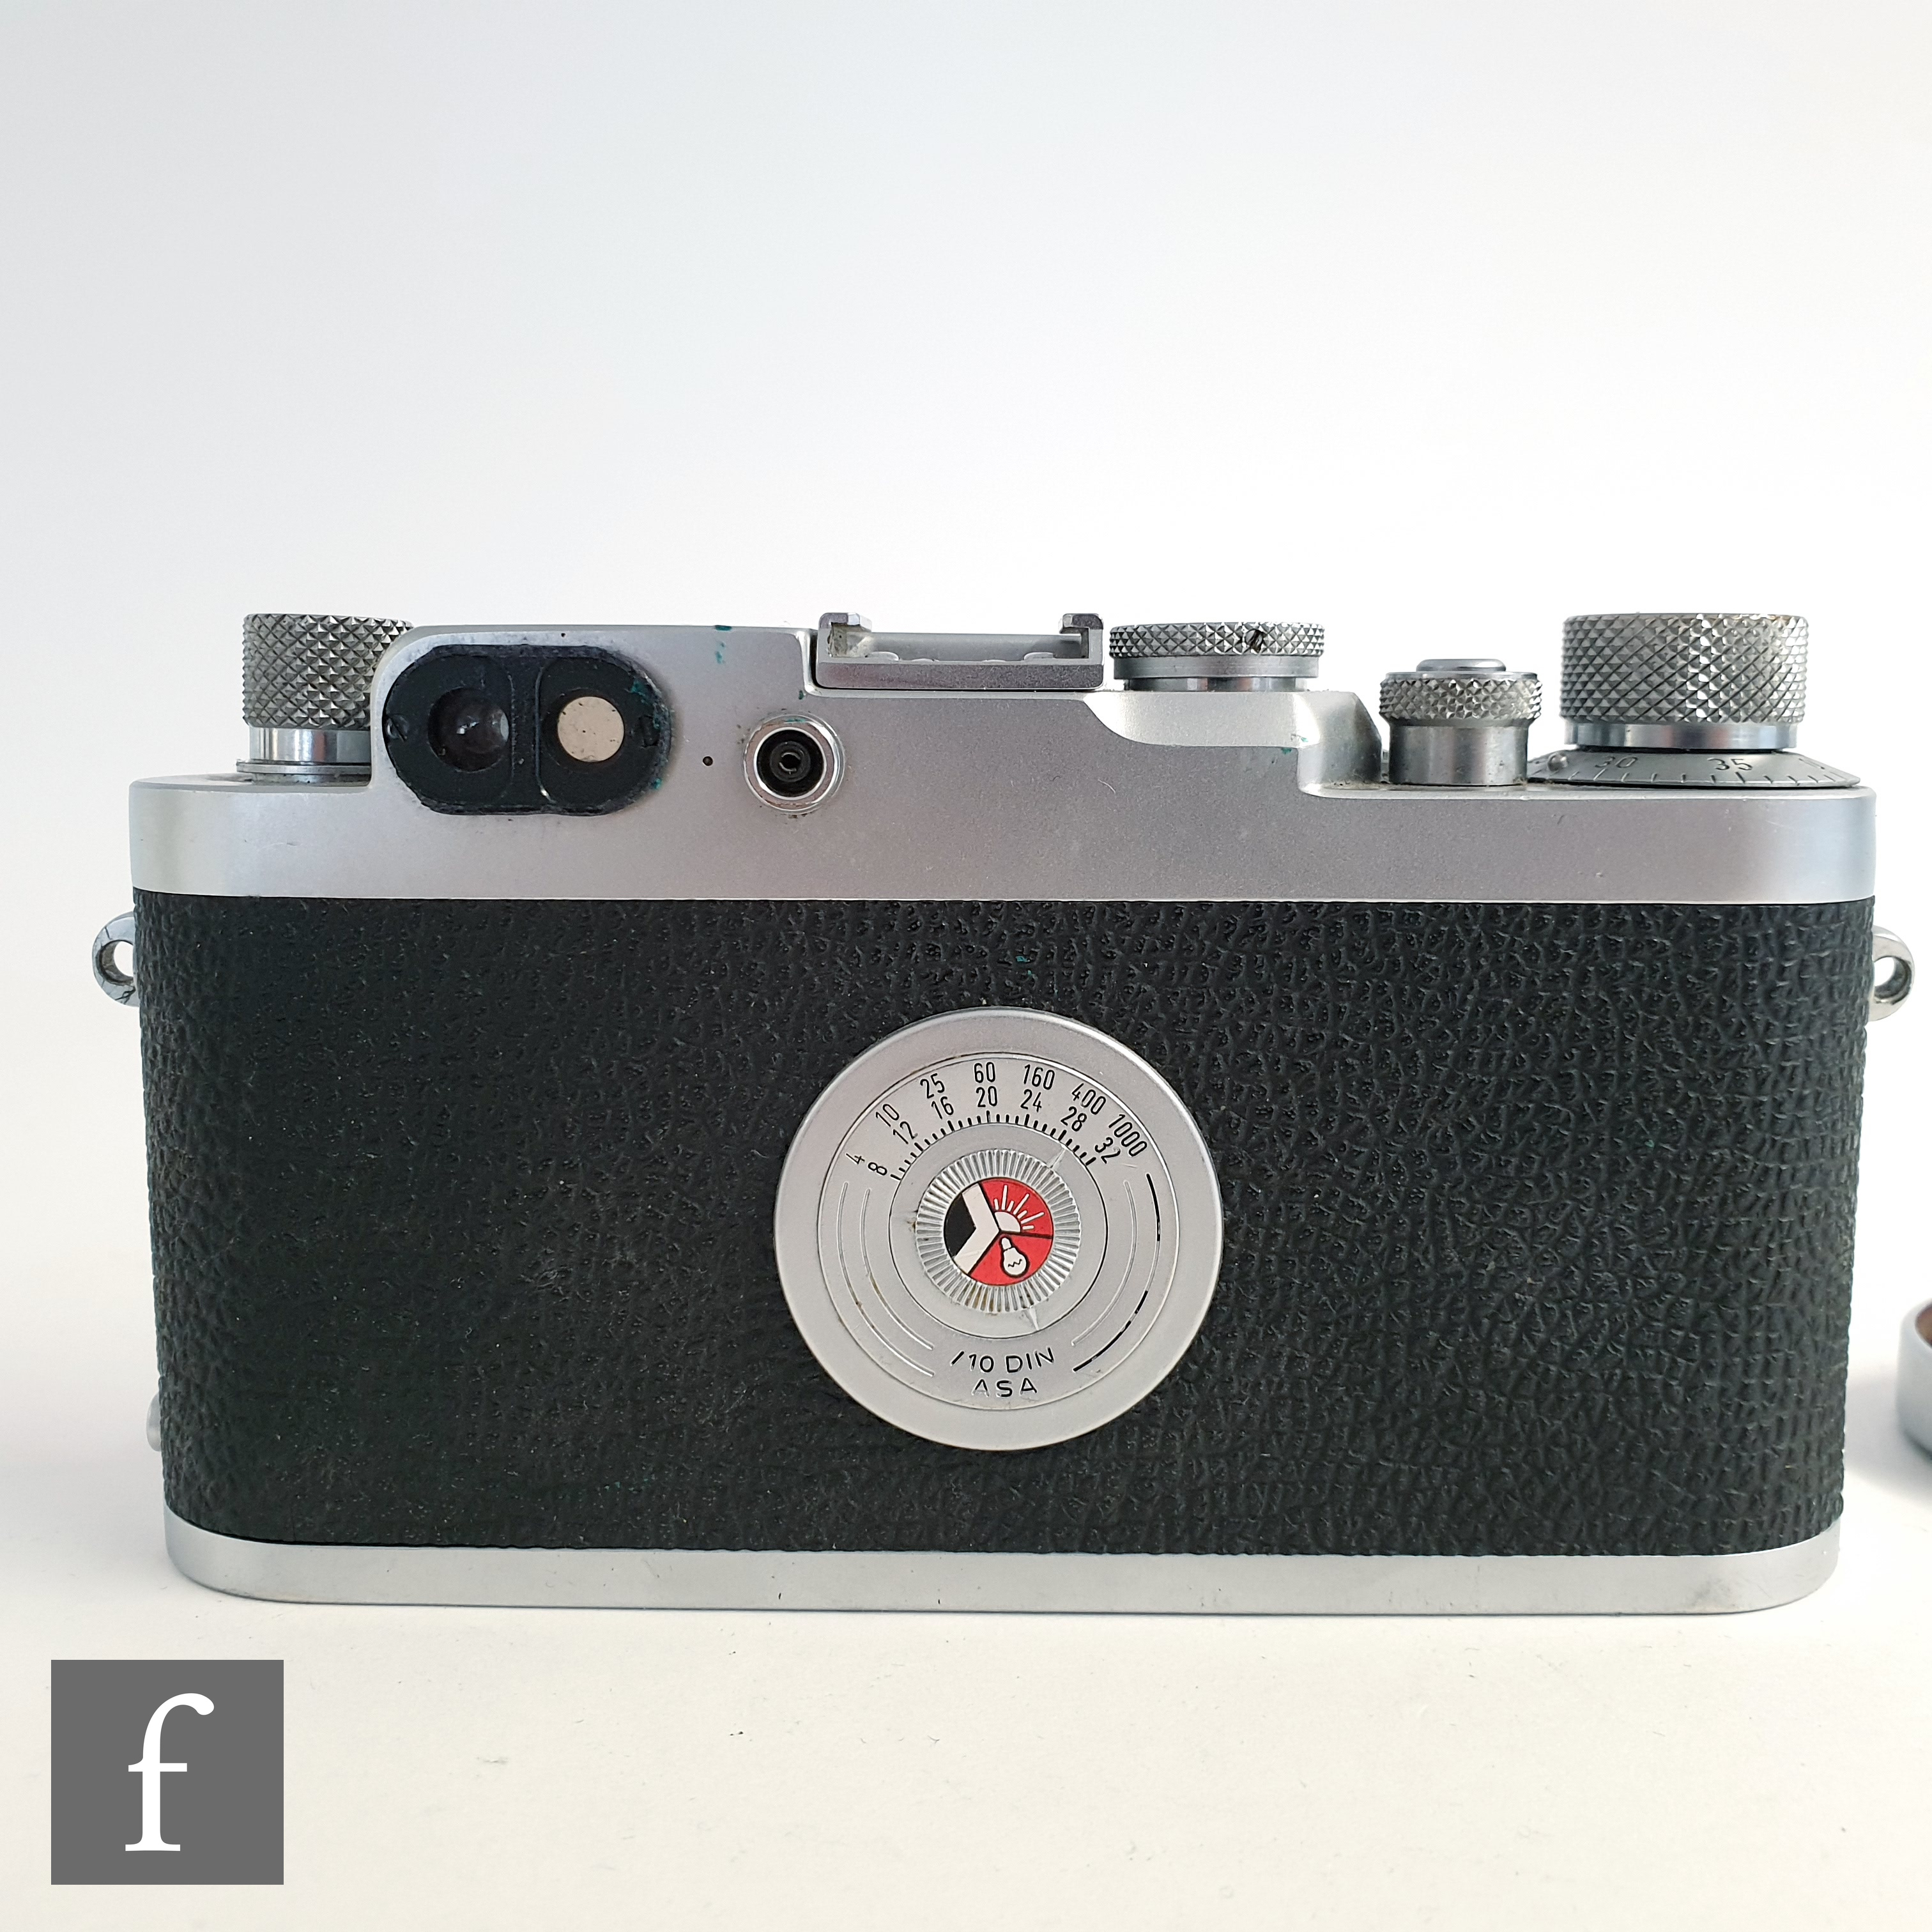 A Leica IIIG rangefinder screw mount camera, circa 1957, serial number 888732, with Ernst Leitz f= - Image 3 of 6